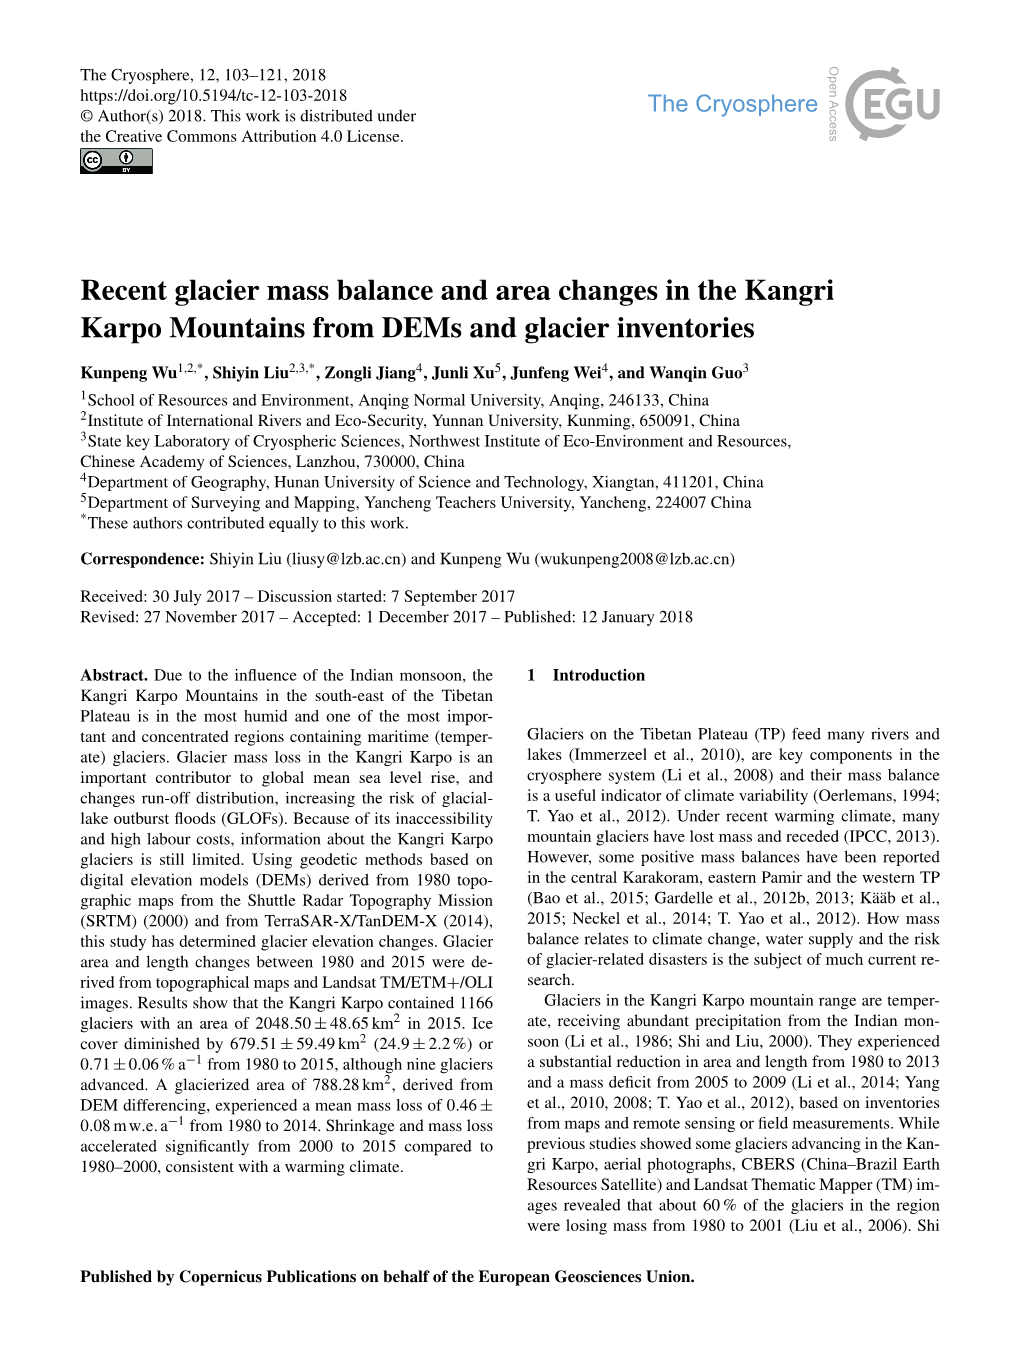 Recent Glacier Mass Balance and Area Changes in the Kangri Karpo Mountains from Dems and Glacier Inventories